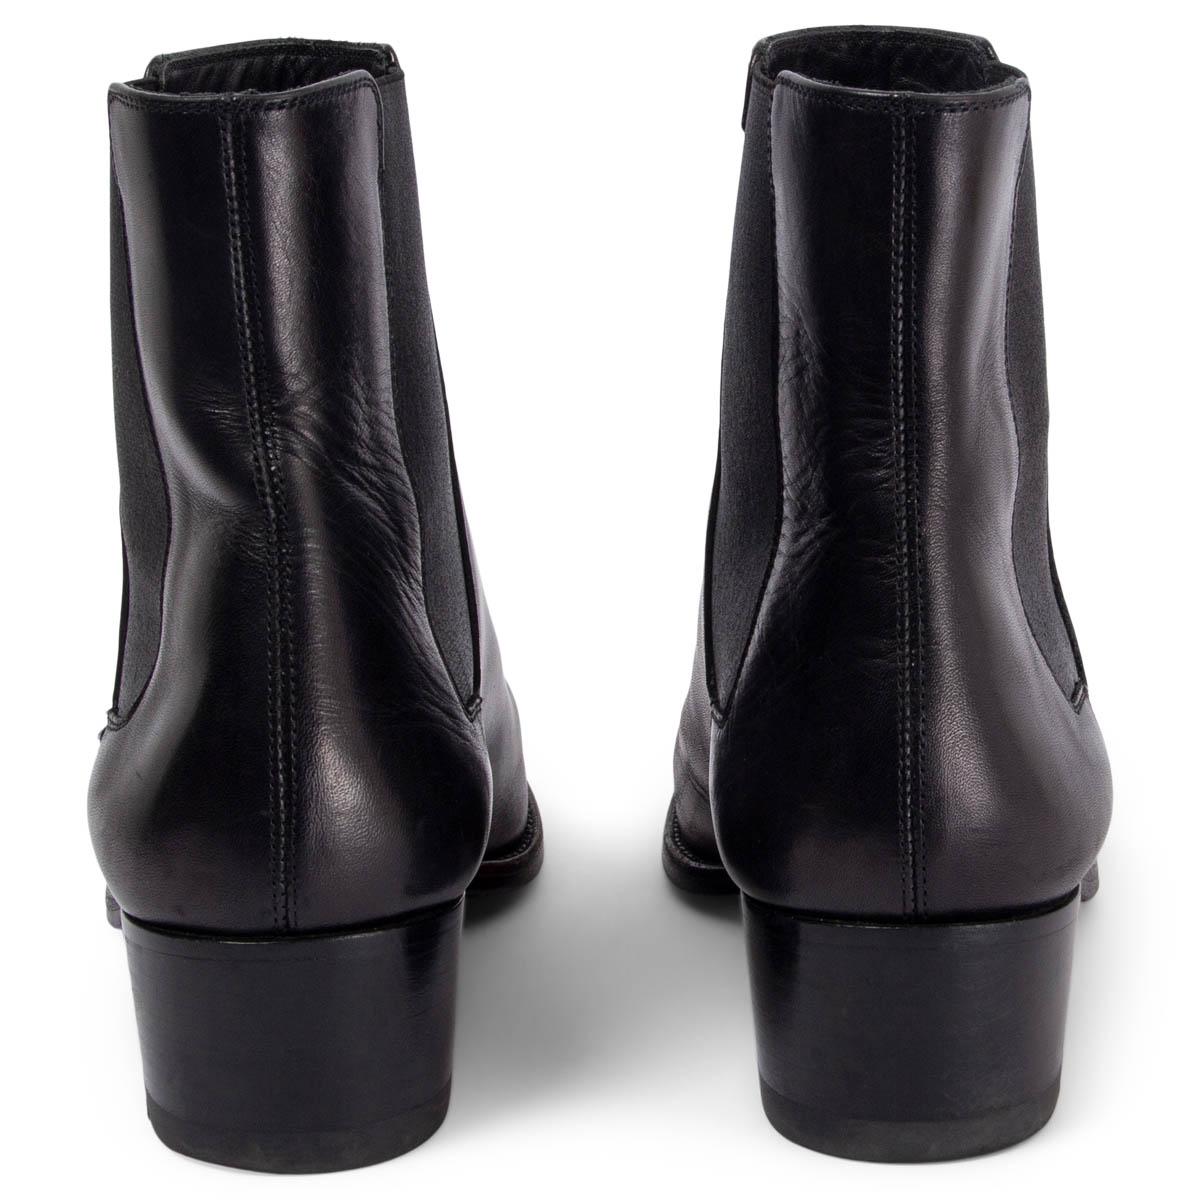 SAINT LAURENT black leather WYATT 40 Ankle Boots Shoes 38 In Good Condition For Sale In Zürich, CH